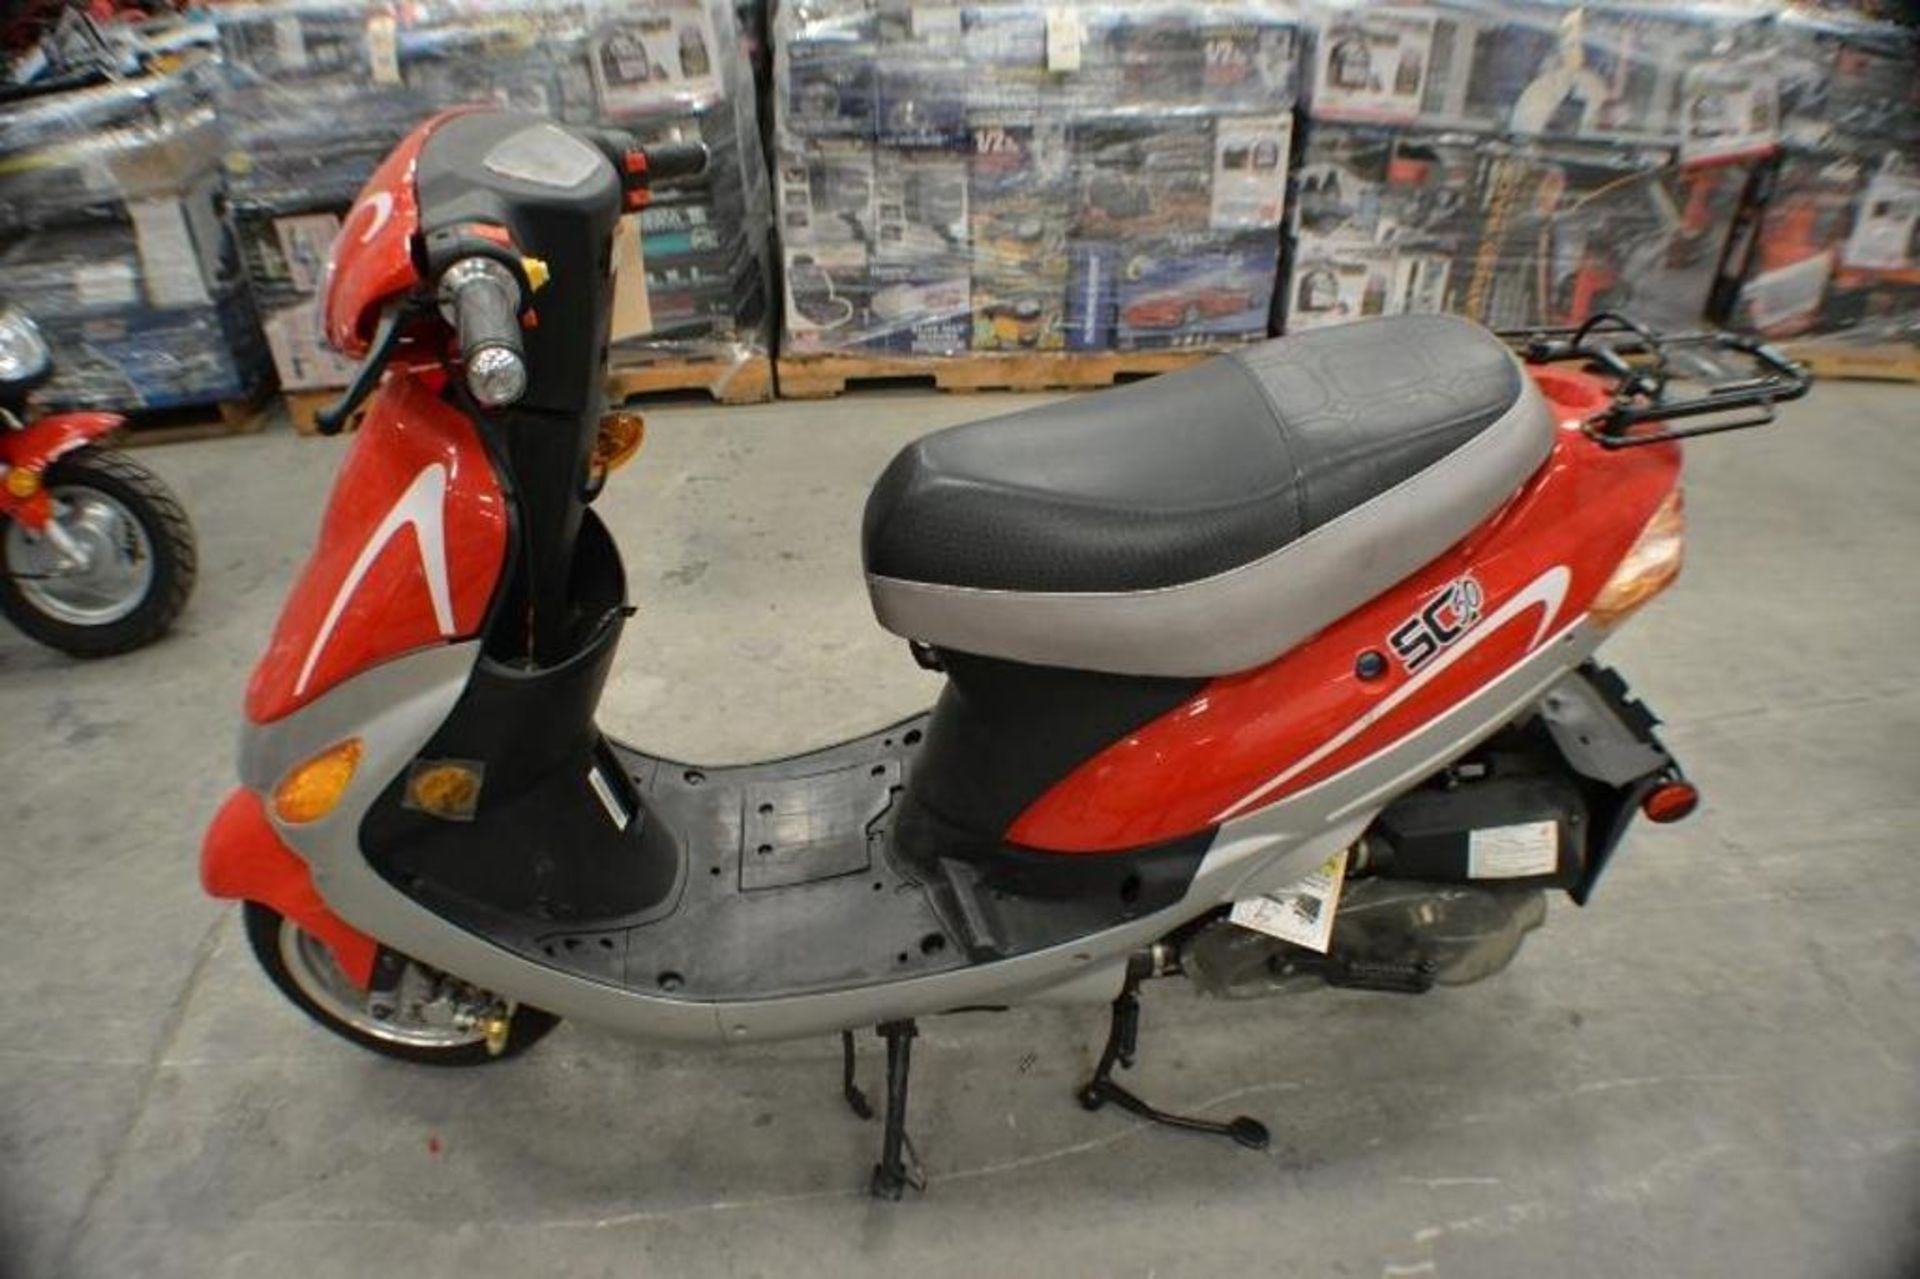 Electric Scooter 50cc Red/Black Color. This unit is for EXPORT ONLY. Buyers acknowledges is for expo - Image 7 of 7